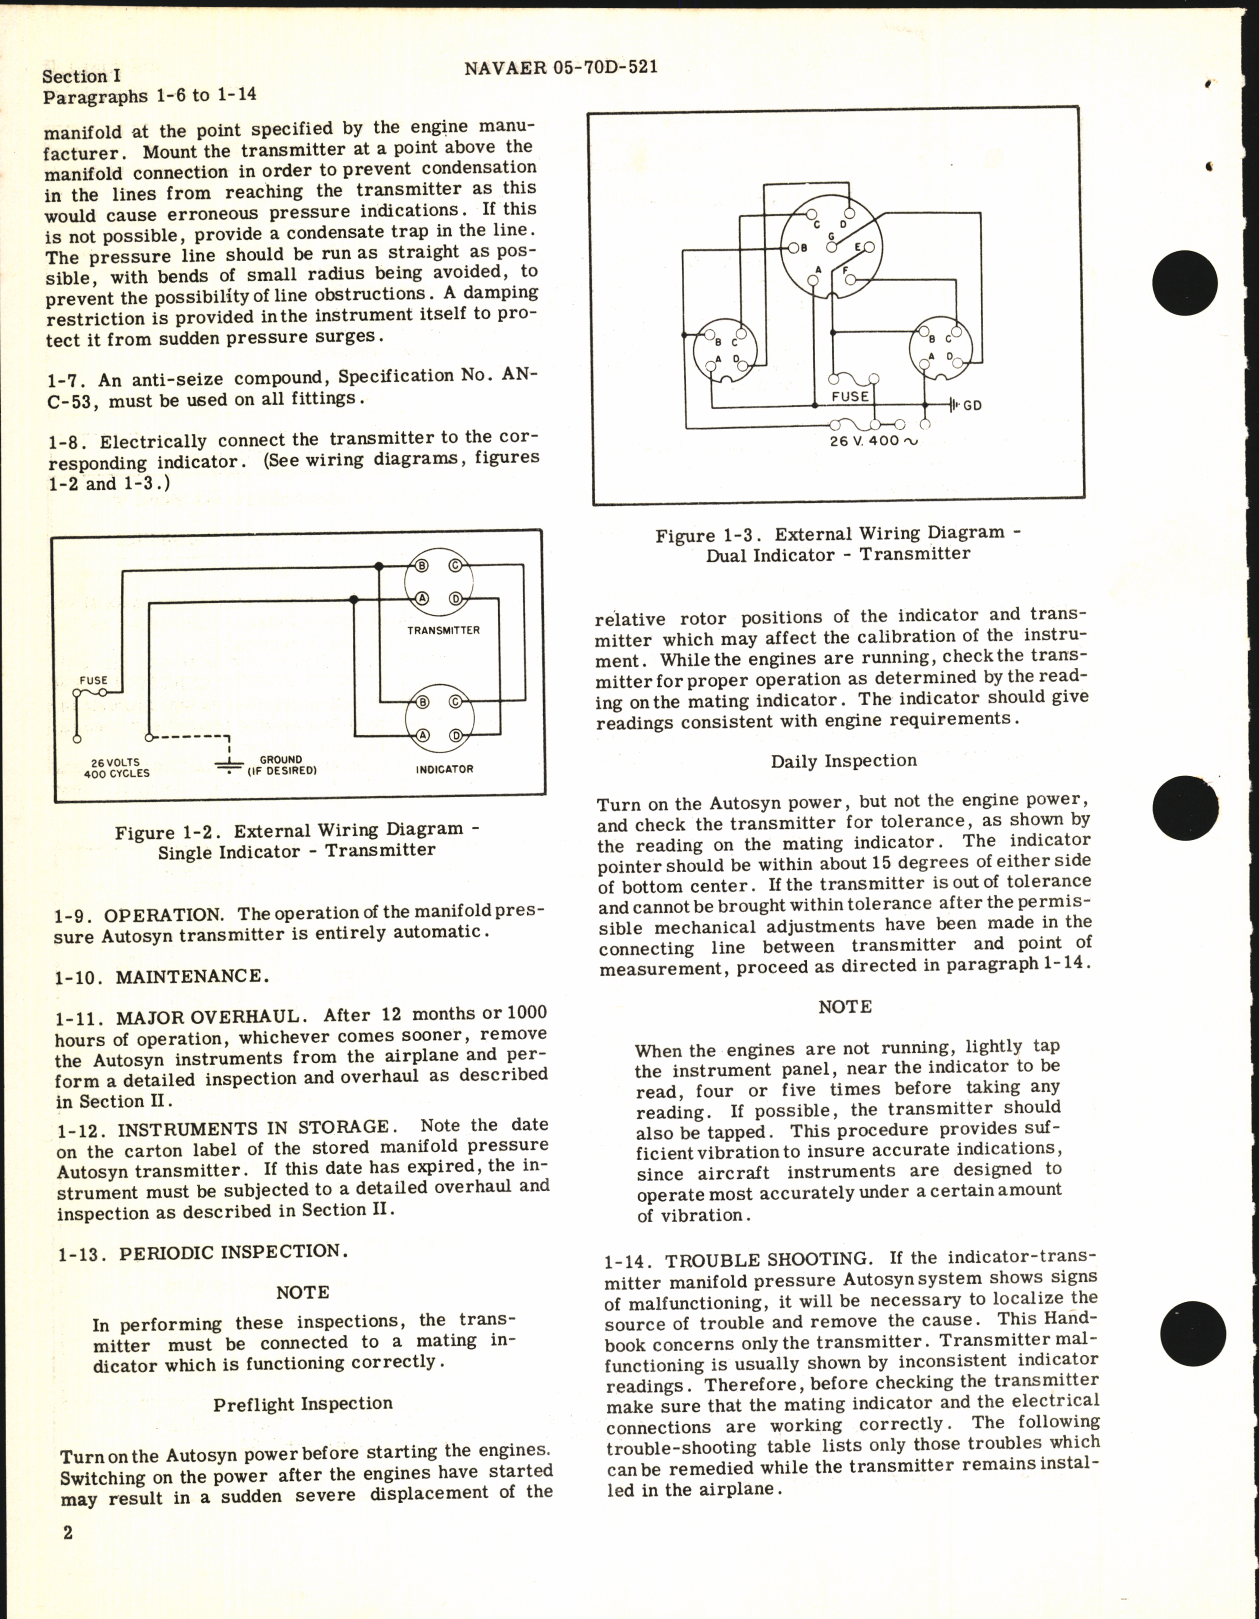 Sample page 6 from AirCorps Library document: Operation, Service, & Overhaul Inst w/ Parts Catalog for Manifold Pressure Transmitters